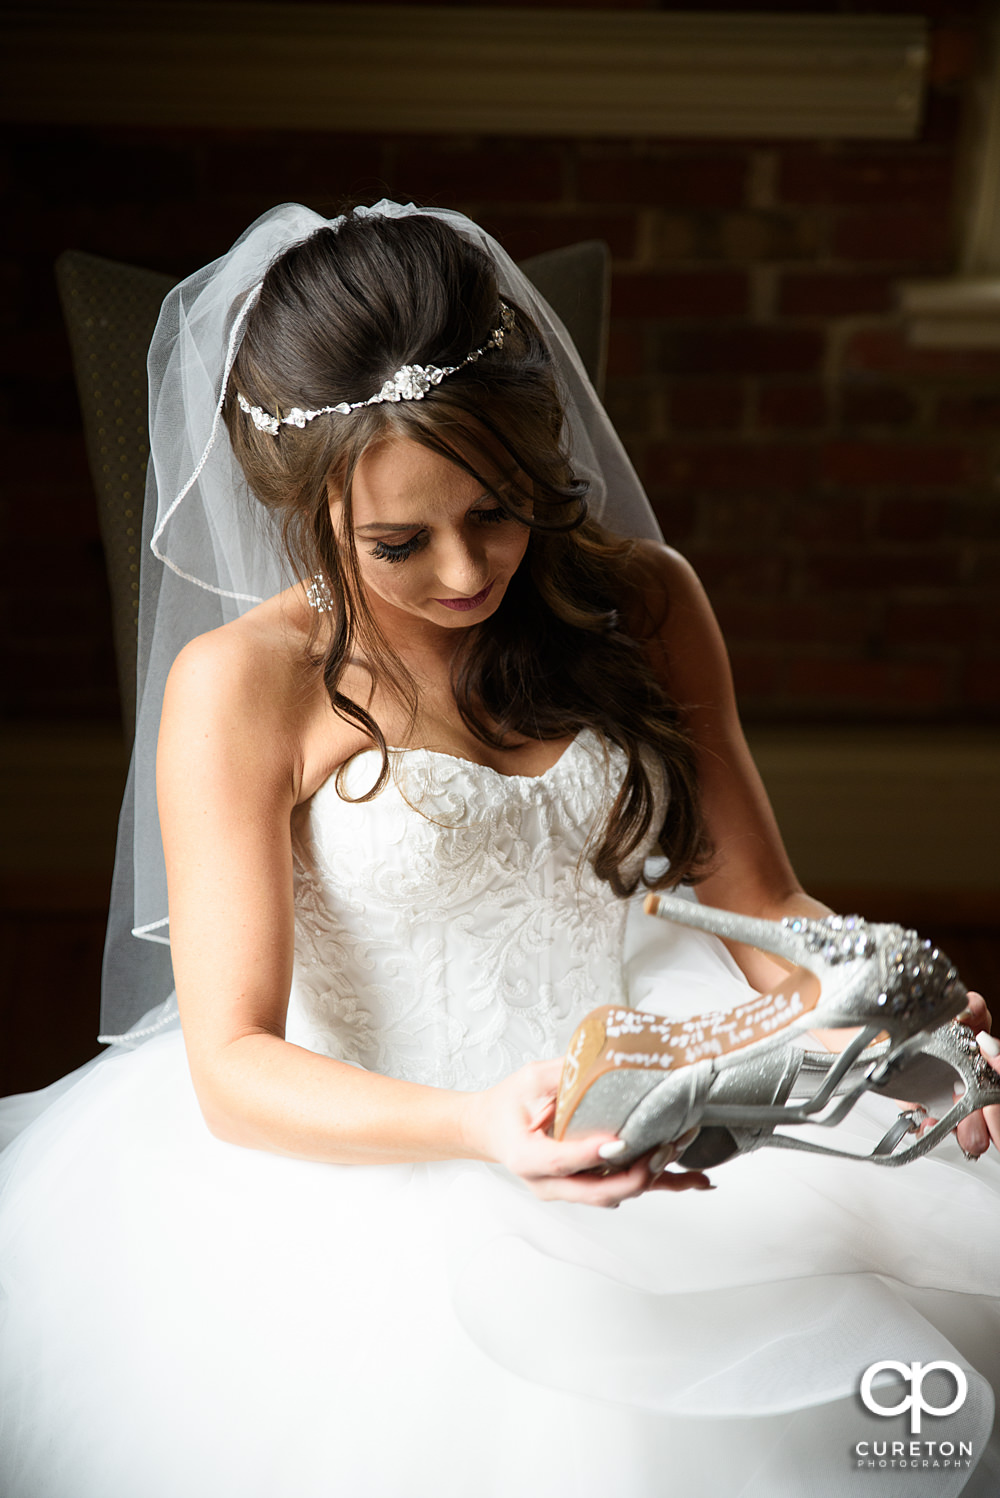 Bride reading a note left on her shoes.